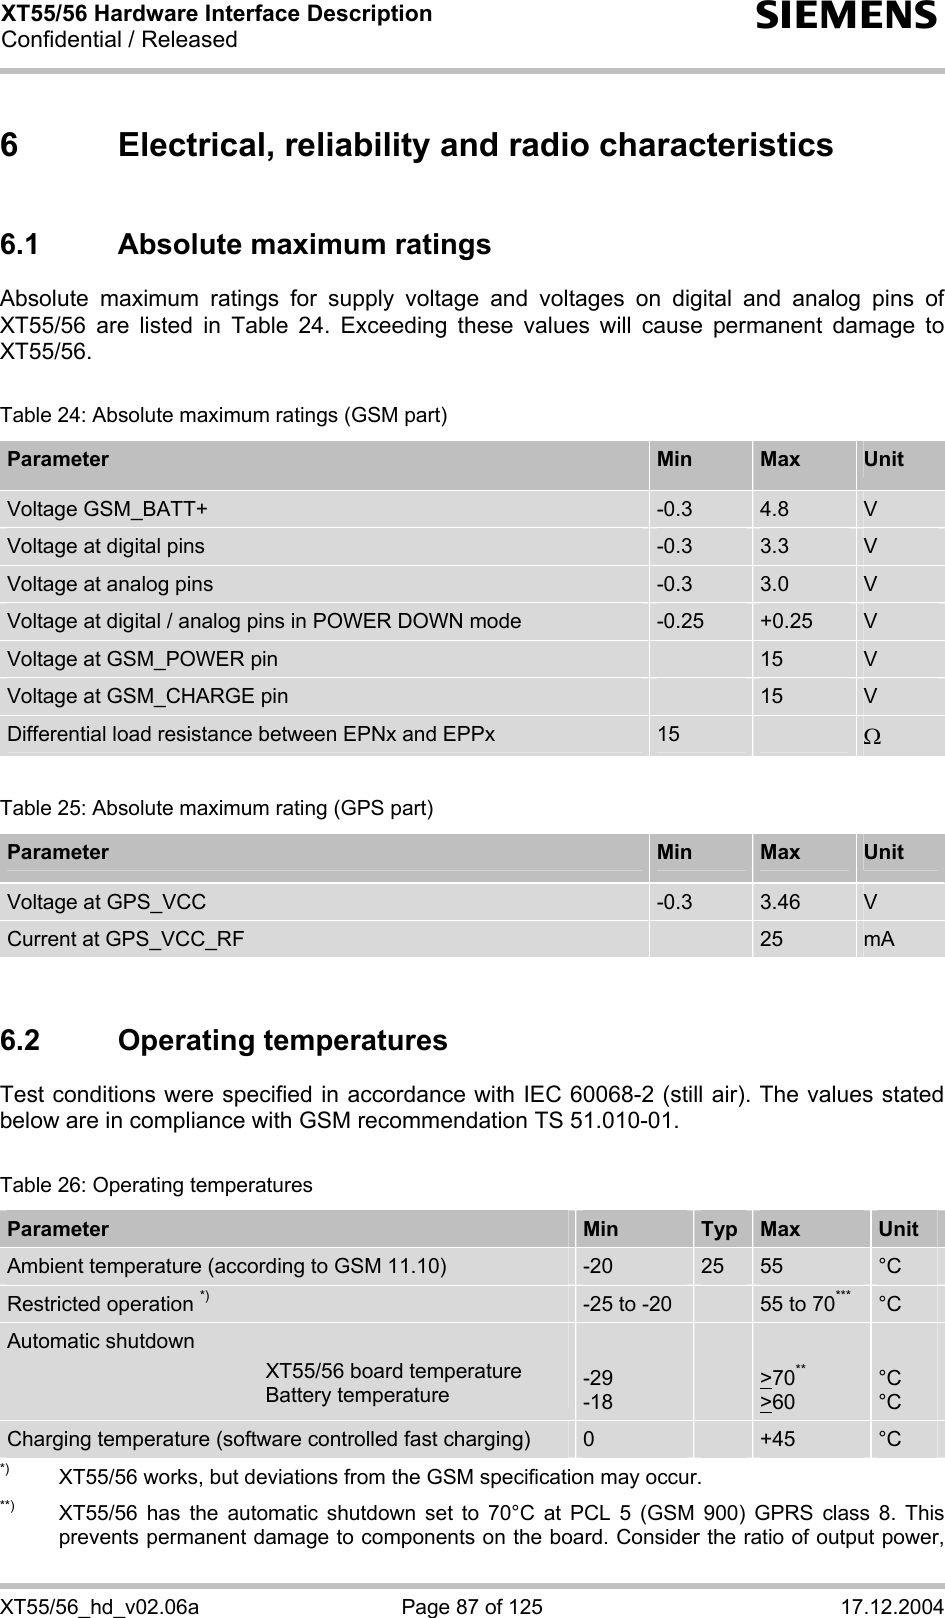 XT55/56 Hardware Interface Description Confidential / Released s XT55/56_hd_v02.06a  Page 87 of 125  17.12.2004 6  Electrical, reliability and radio characteristics 6.1  Absolute maximum ratings Absolute maximum ratings for supply voltage and voltages on digital and analog pins of XT55/56 are listed in Table 24. Exceeding these values will cause permanent damage to XT55/56.  Table 24: Absolute maximum ratings (GSM part) Parameter  Min  Max  Unit Voltage GSM_BATT+  -0.3  4.8  V Voltage at digital pins   -0.3  3.3  V Voltage at analog pins   -0.3  3.0  V Voltage at digital / analog pins in POWER DOWN mode  -0.25  +0.25  V Voltage at GSM_POWER pin   15  V Voltage at GSM_CHARGE pin   15  V Differential load resistance between EPNx and EPPx  15   Ω  Table 25: Absolute maximum rating (GPS part) Parameter  Min  Max  Unit Voltage at GPS_VCC  -0.3  3.46  V Current at GPS_VCC_RF   25  mA  6.2 Operating temperatures Test conditions were specified in accordance with IEC 60068-2 (still air). The values stated below are in compliance with GSM recommendation TS 51.010-01.  Table 26: Operating temperatures Parameter  Min  Typ  Max  Unit Ambient temperature (according to GSM 11.10)  -20  25  55  °C Restricted operation *) -25 to -20   55 to 70*** °C Automatic shutdown   XT55/56 board temperature   Battery temperature  -29 -18    &gt;70** &gt;60  °C °C Charging temperature (software controlled fast charging)  0   +45  °C *)  XT55/56 works, but deviations from the GSM specification may occur. **)   XT55/56 has the automatic shutdown set to 70°C at PCL 5 (GSM 900) GPRS class 8. This prevents permanent damage to components on the board. Consider the ratio of output power, 